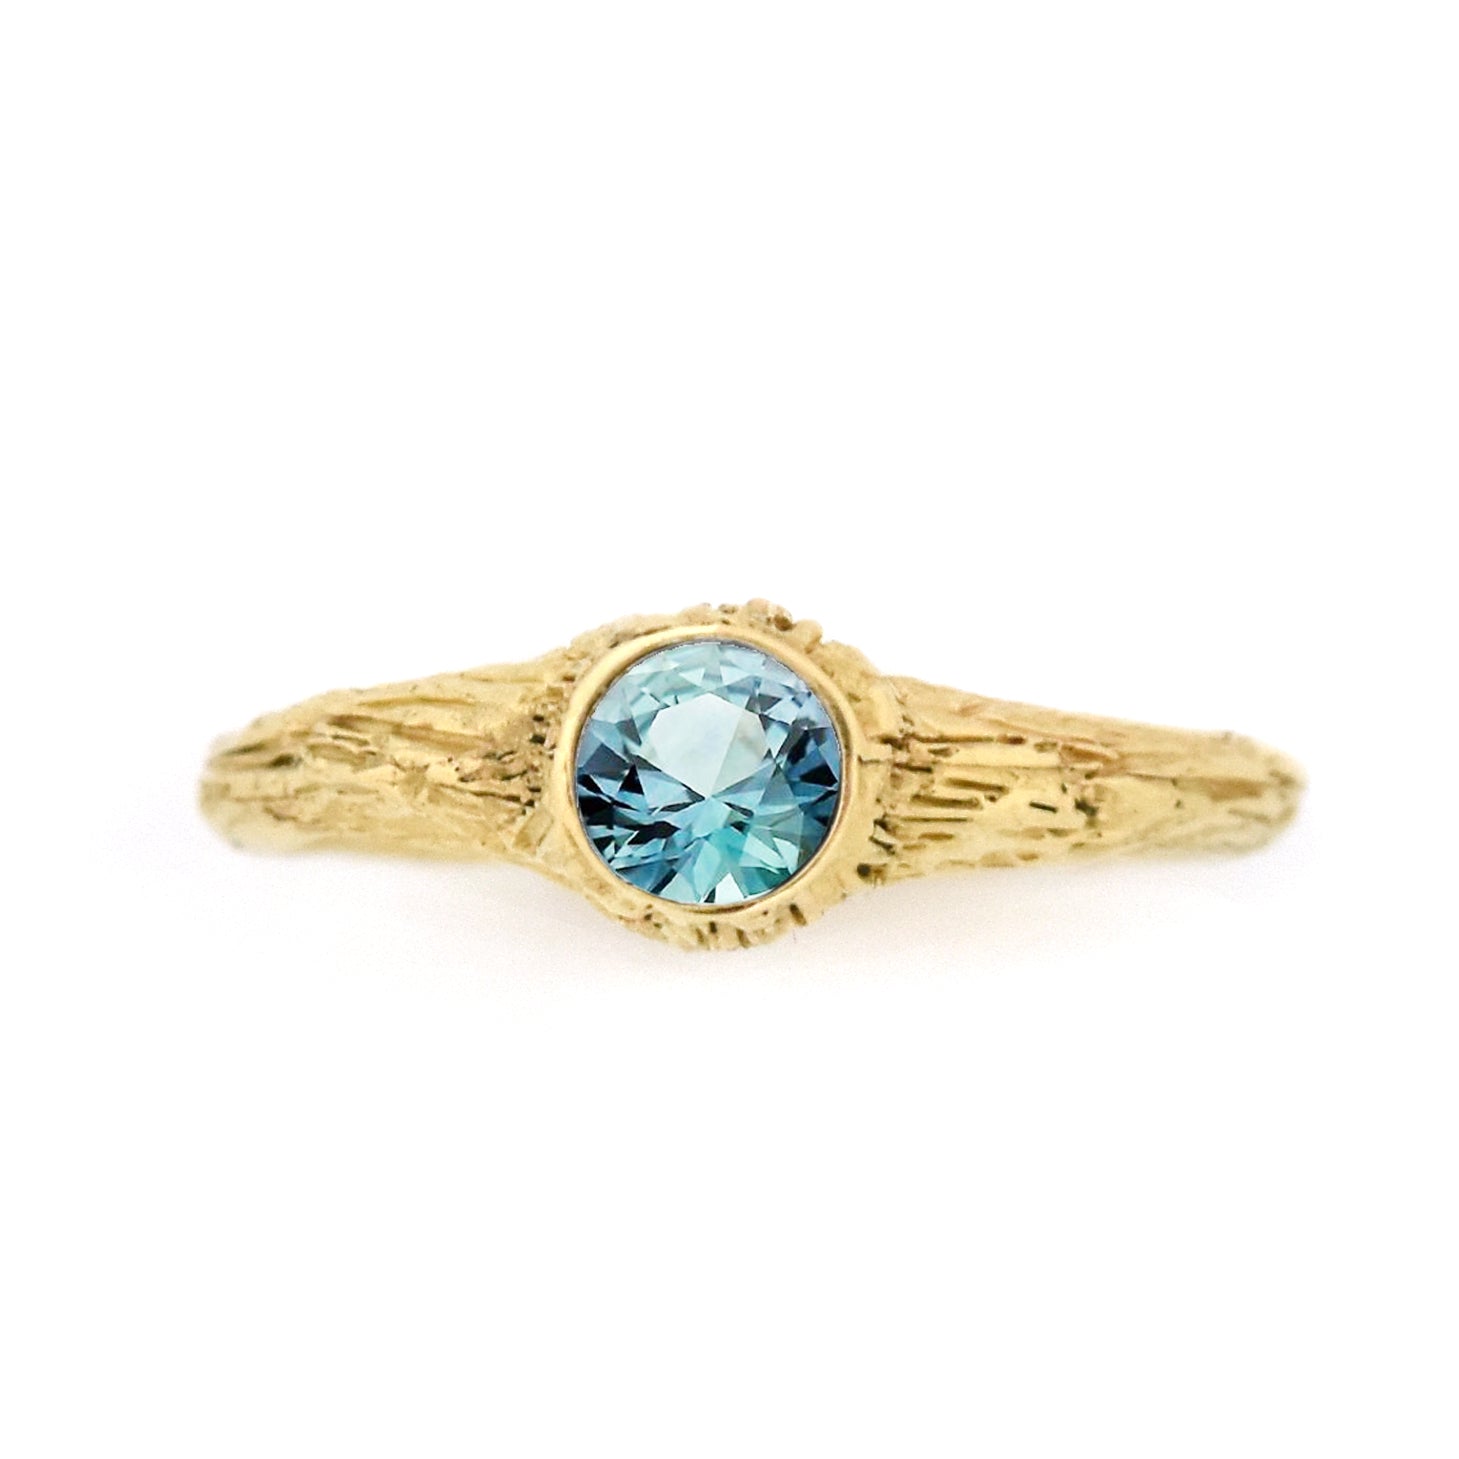 Gold Heartwood Diamond Ring - your choice of 5mm stone & gold - Wedding Ring Lab Created Diamond / 18K Palladium White Gold Lab Created Diamond / 14K Rose Gold 6335 - handmade by Beth Millner Jewelry